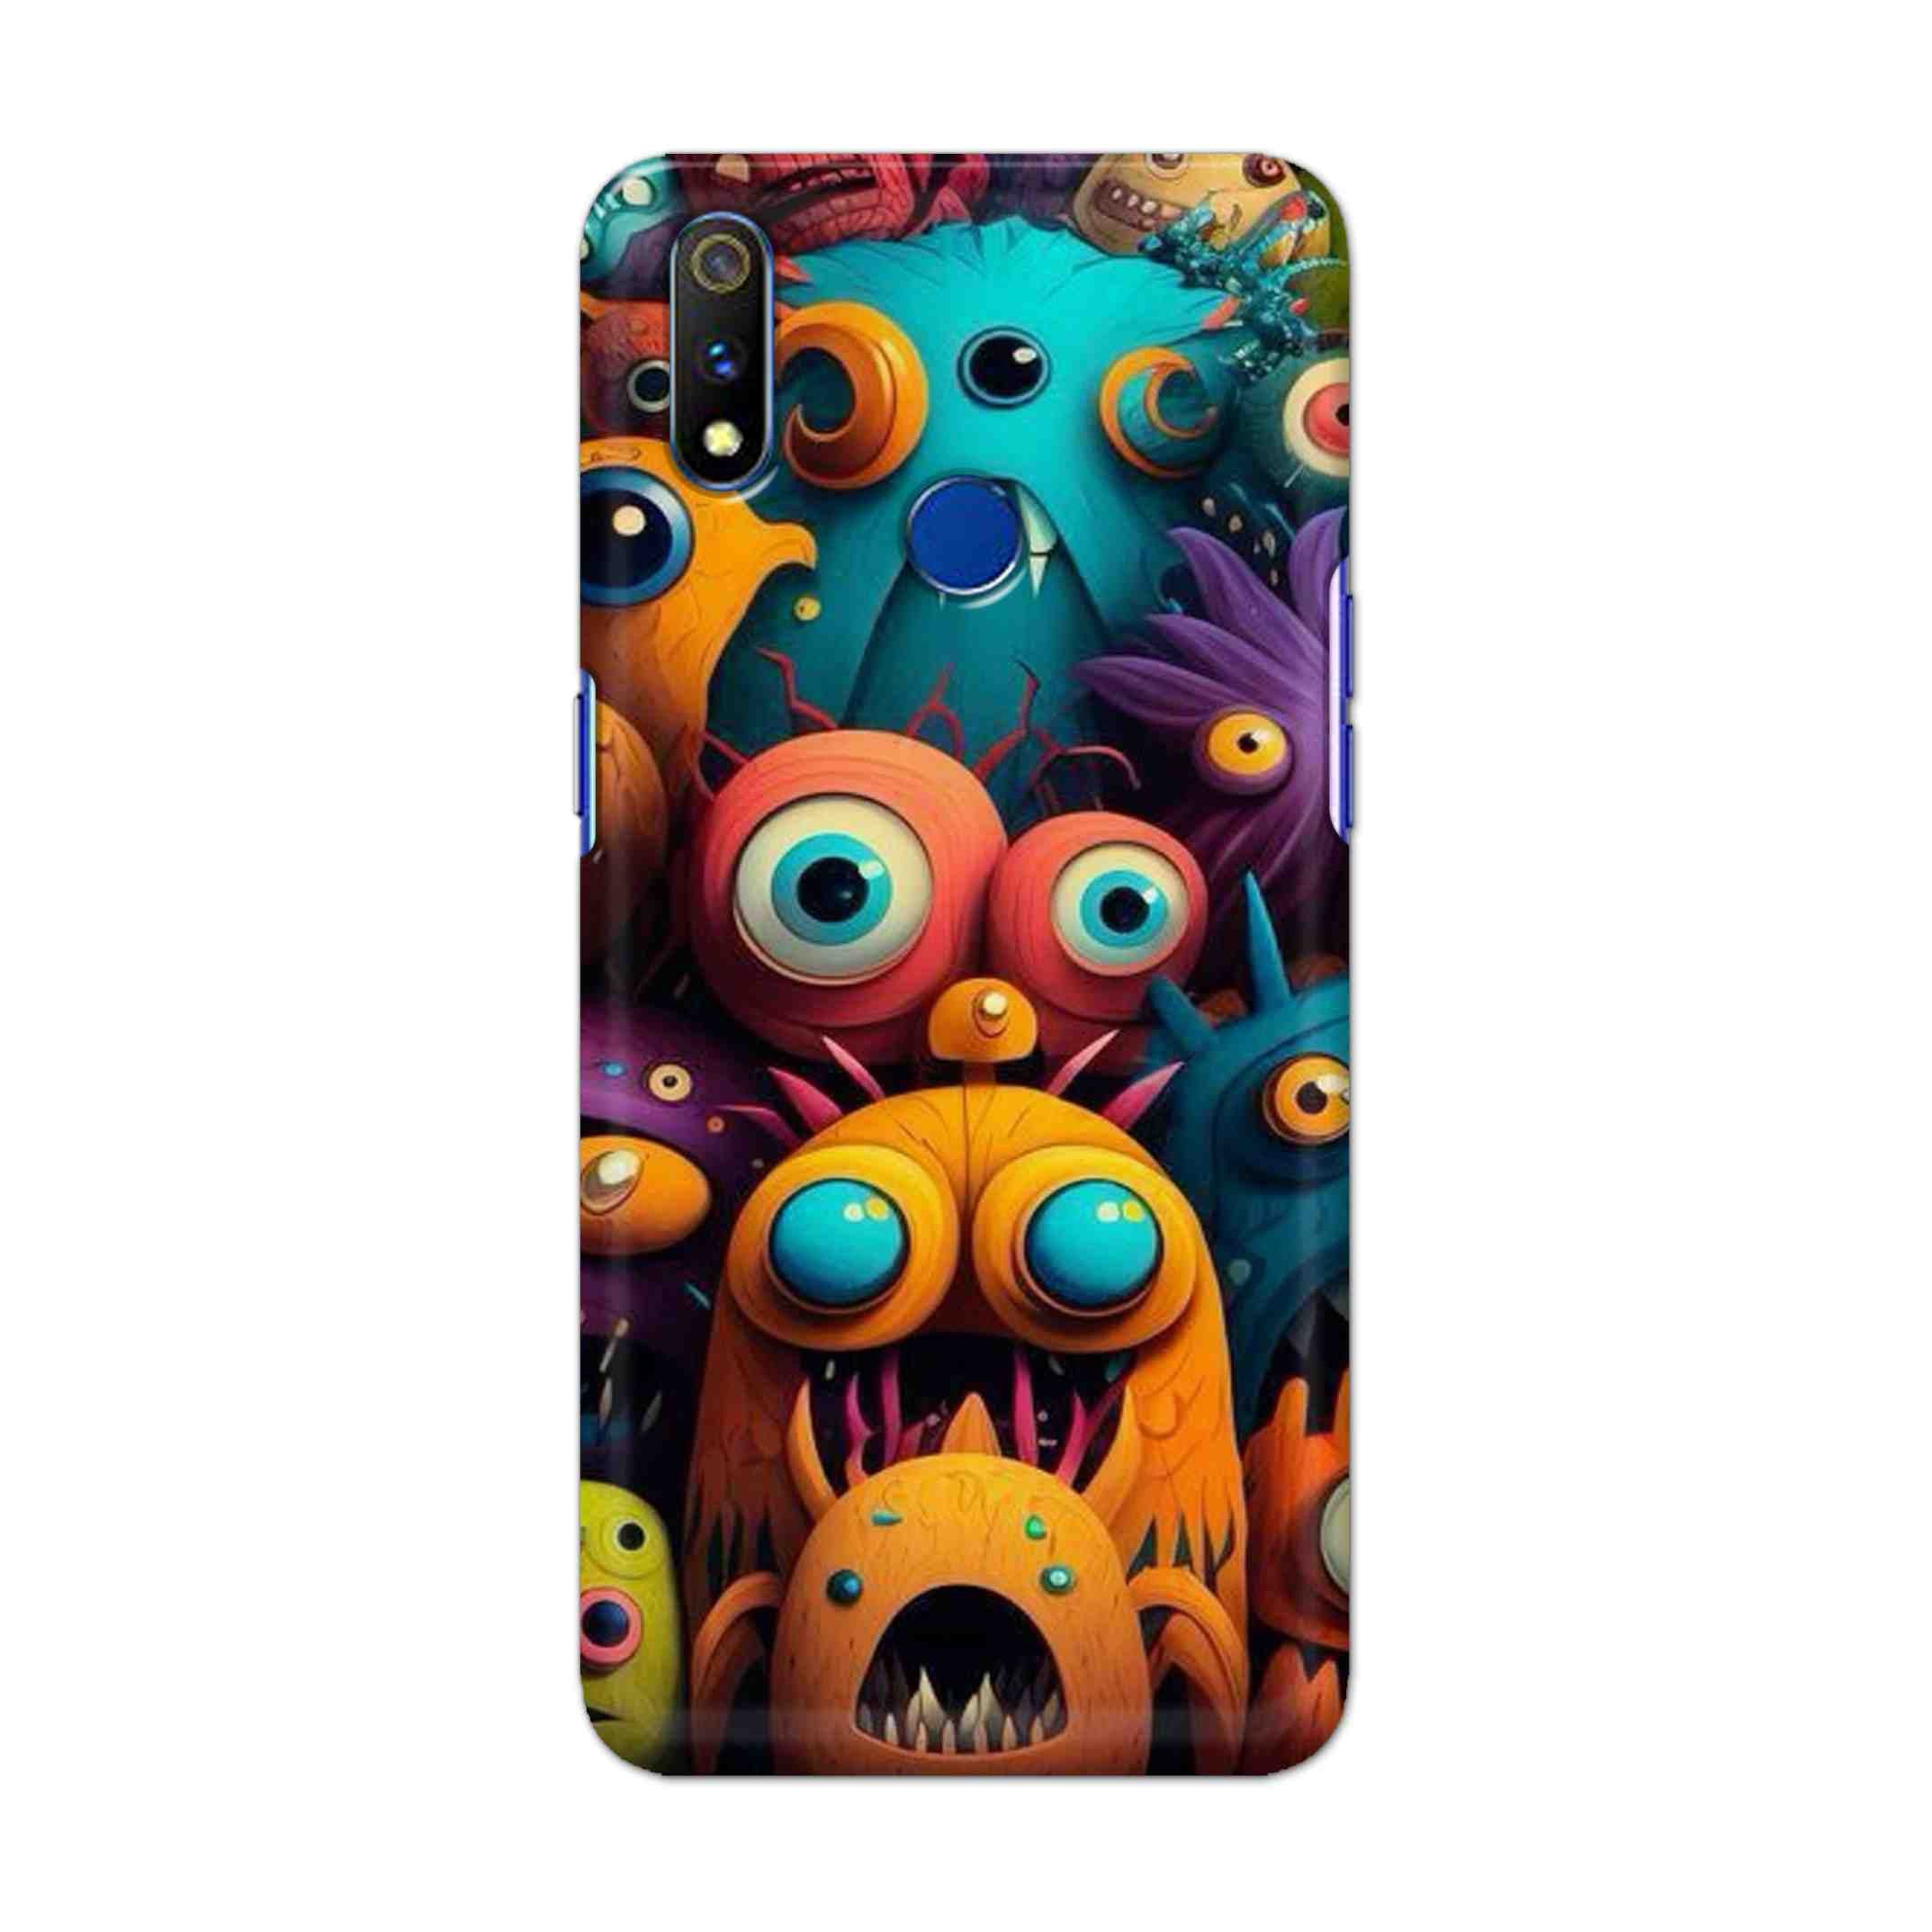 Buy Zombie Hard Back Mobile Phone Case Cover For Realme 3 Pro Online